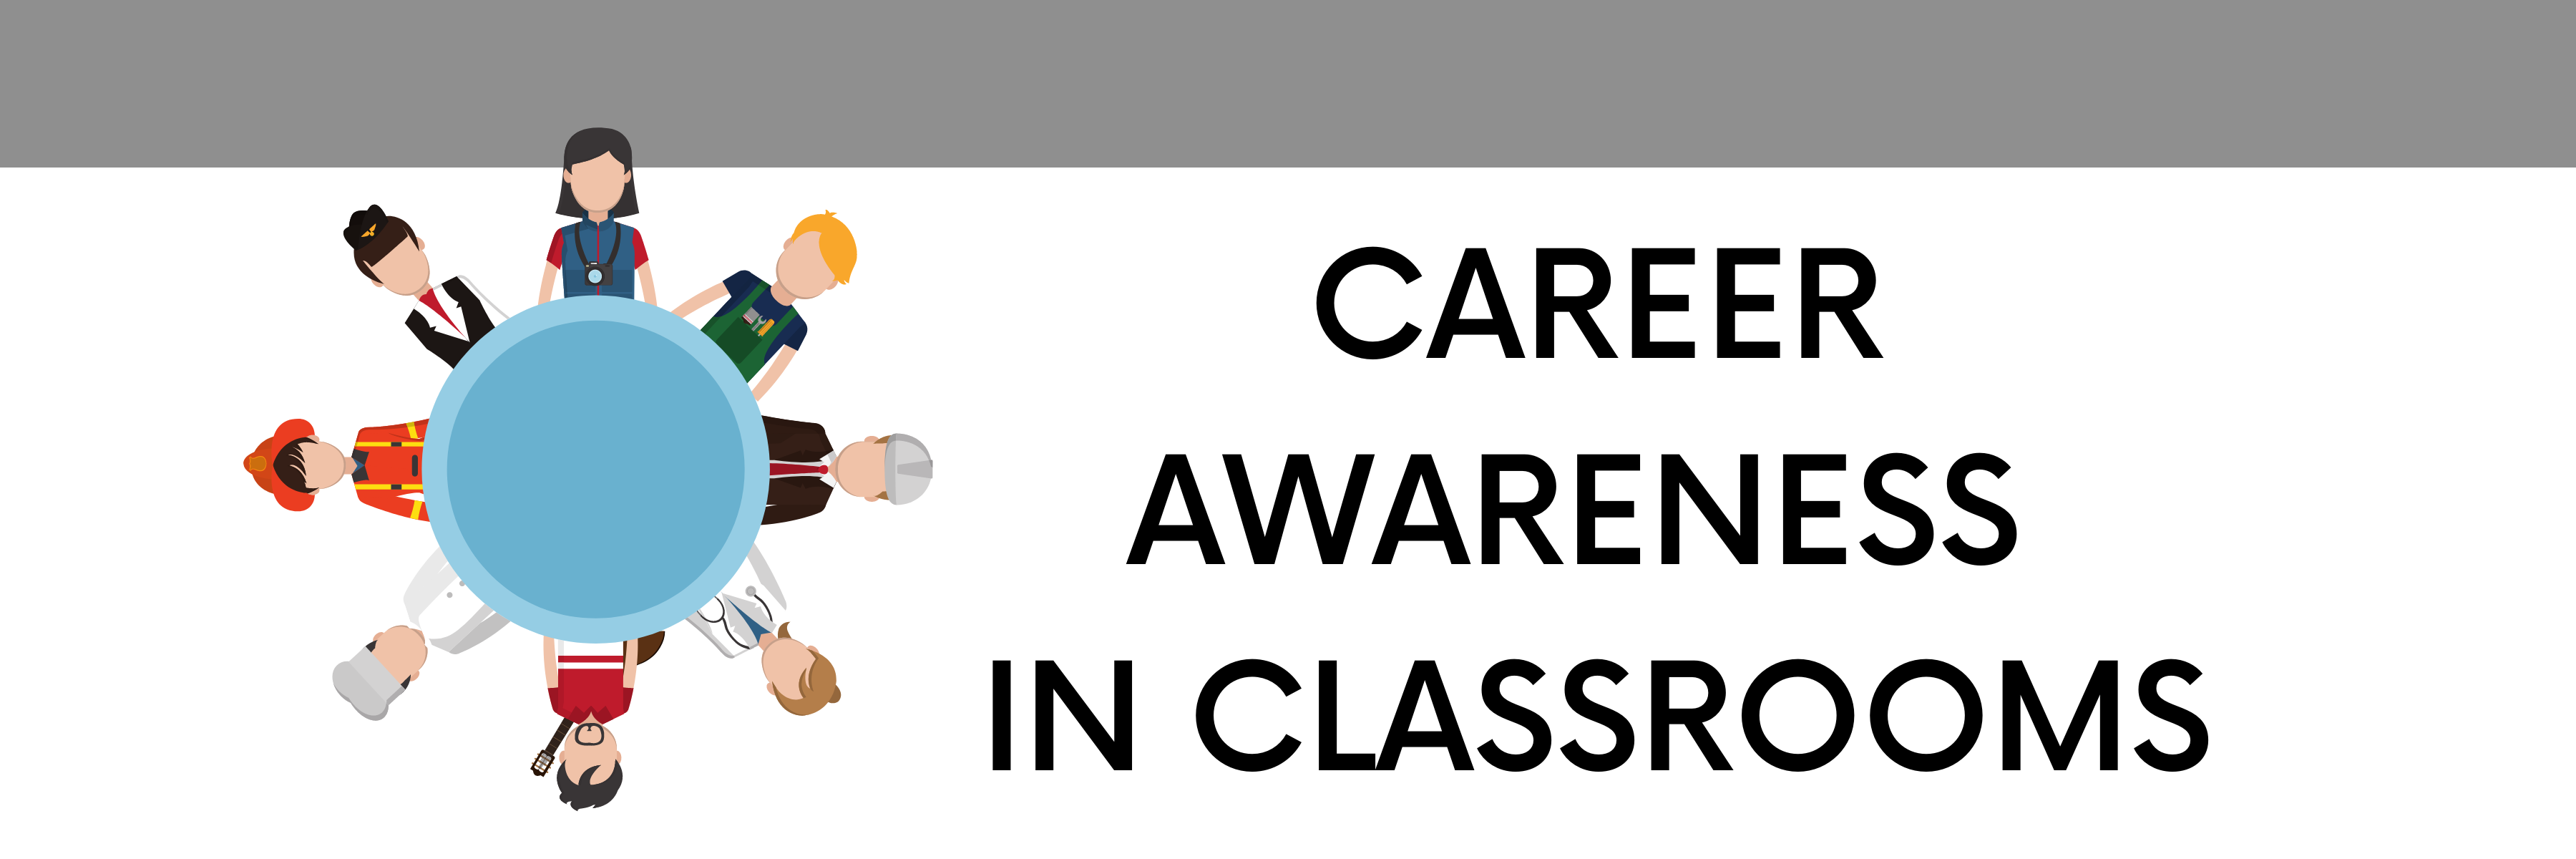 Career Awareness in Classrooms banner with graphic of people in many careers